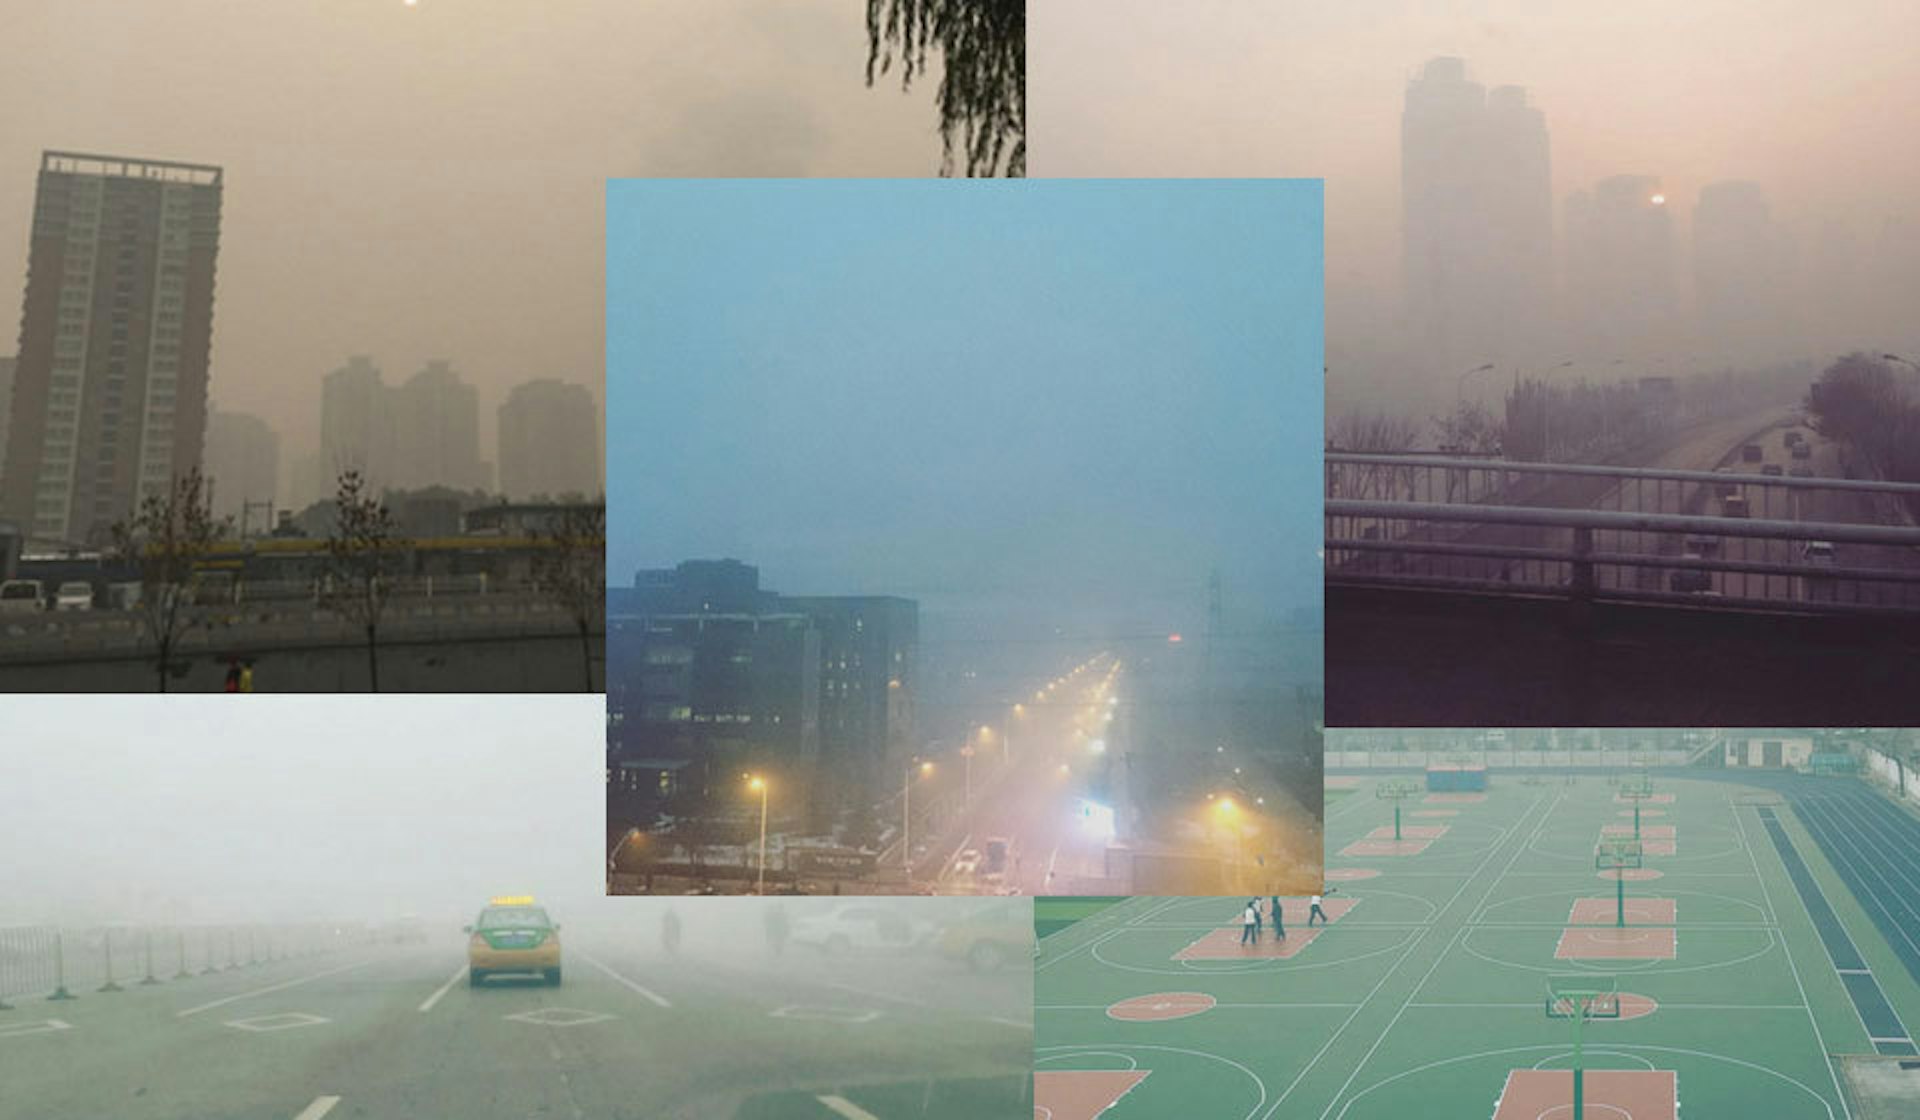 In Pictures: On eve of climate talks, Beijing faces worst-ever pollution levels